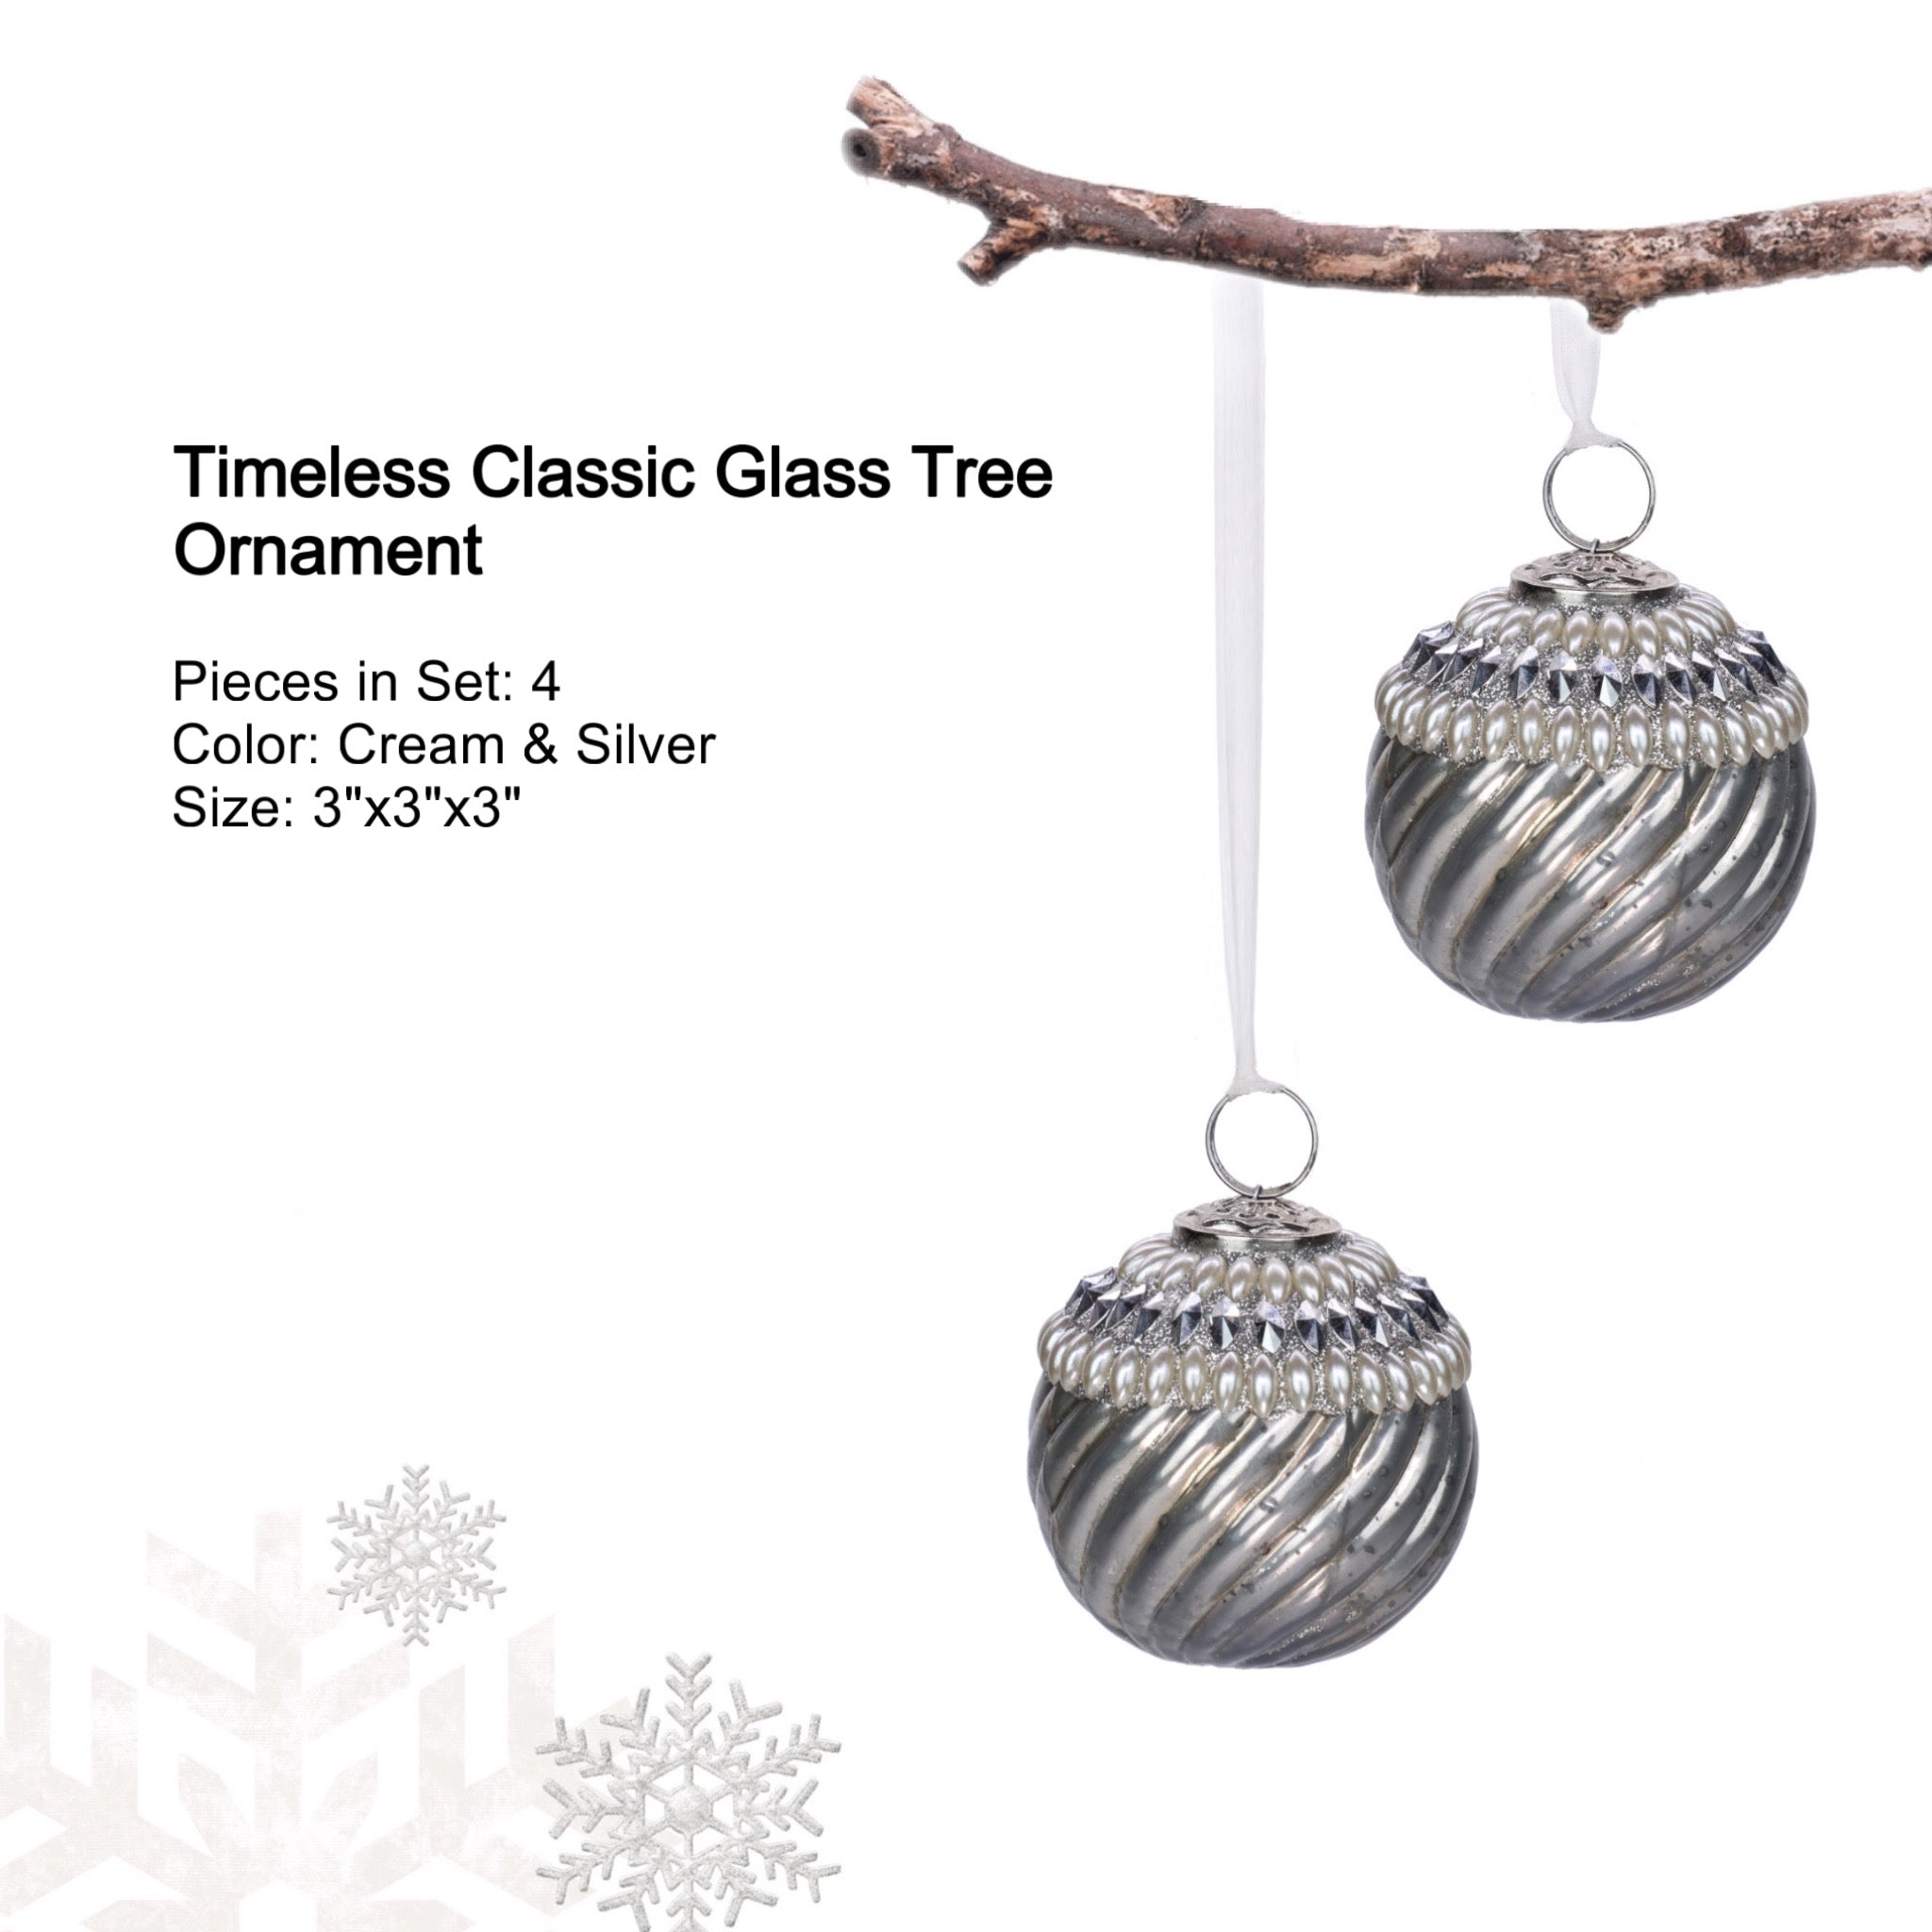 Timeless Classic Glass Tree Ornament in Cream & Silver, Boxed Set of 4